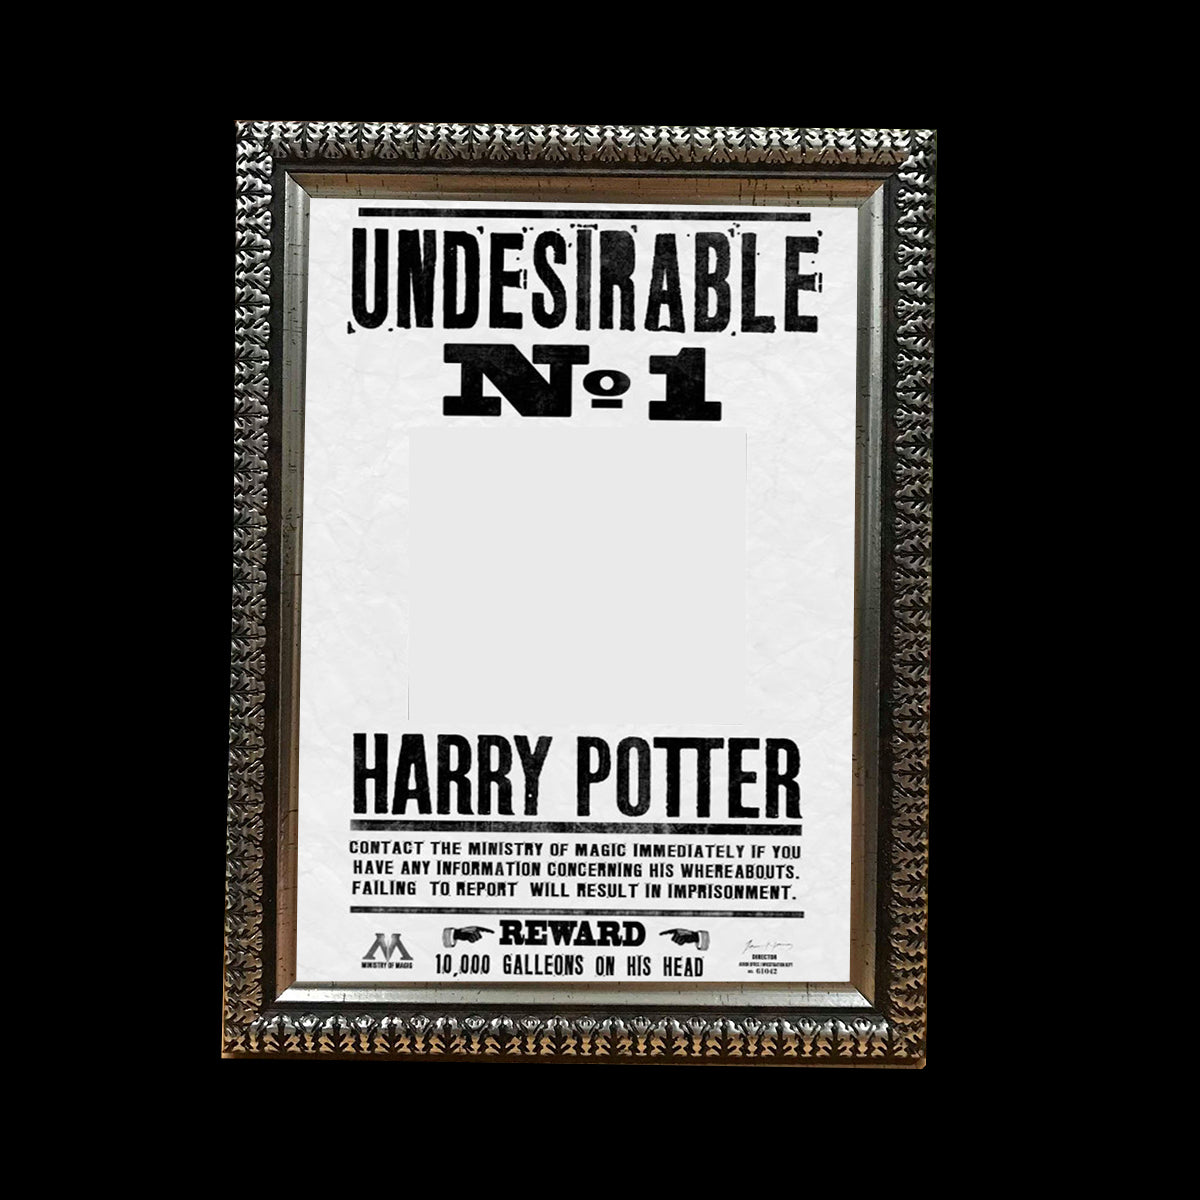 B-HP1 Personalised Photo Frame Collage Poster Harry Potter Home Decor Size 6 inch x 8 inch (Black and White)